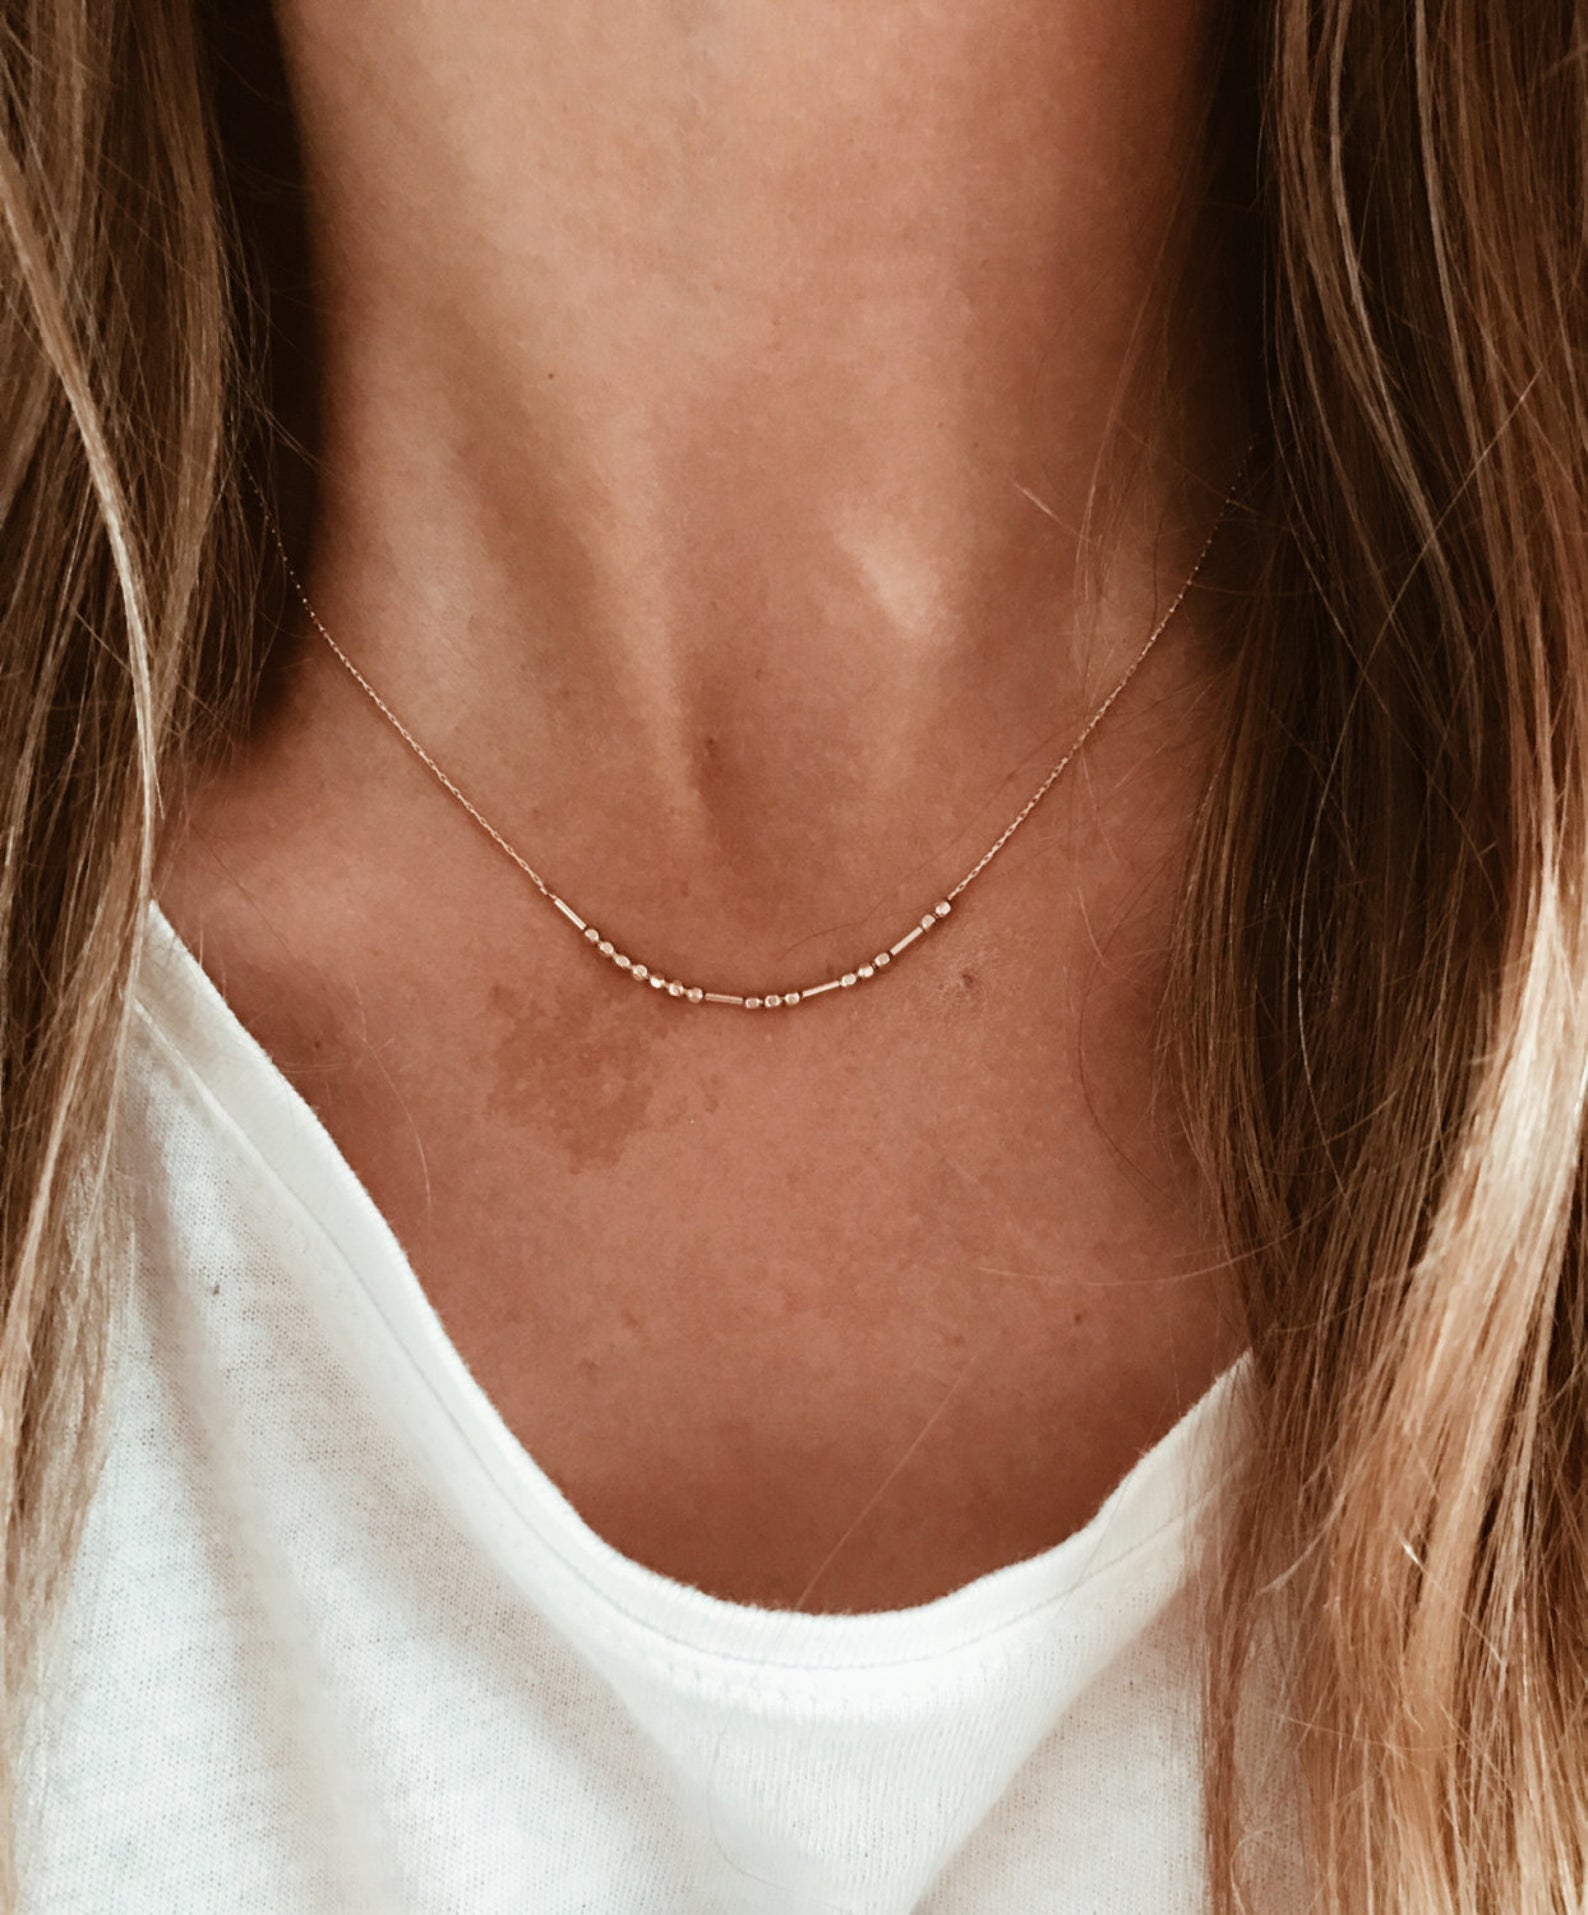 a model wearing the morse code necklace